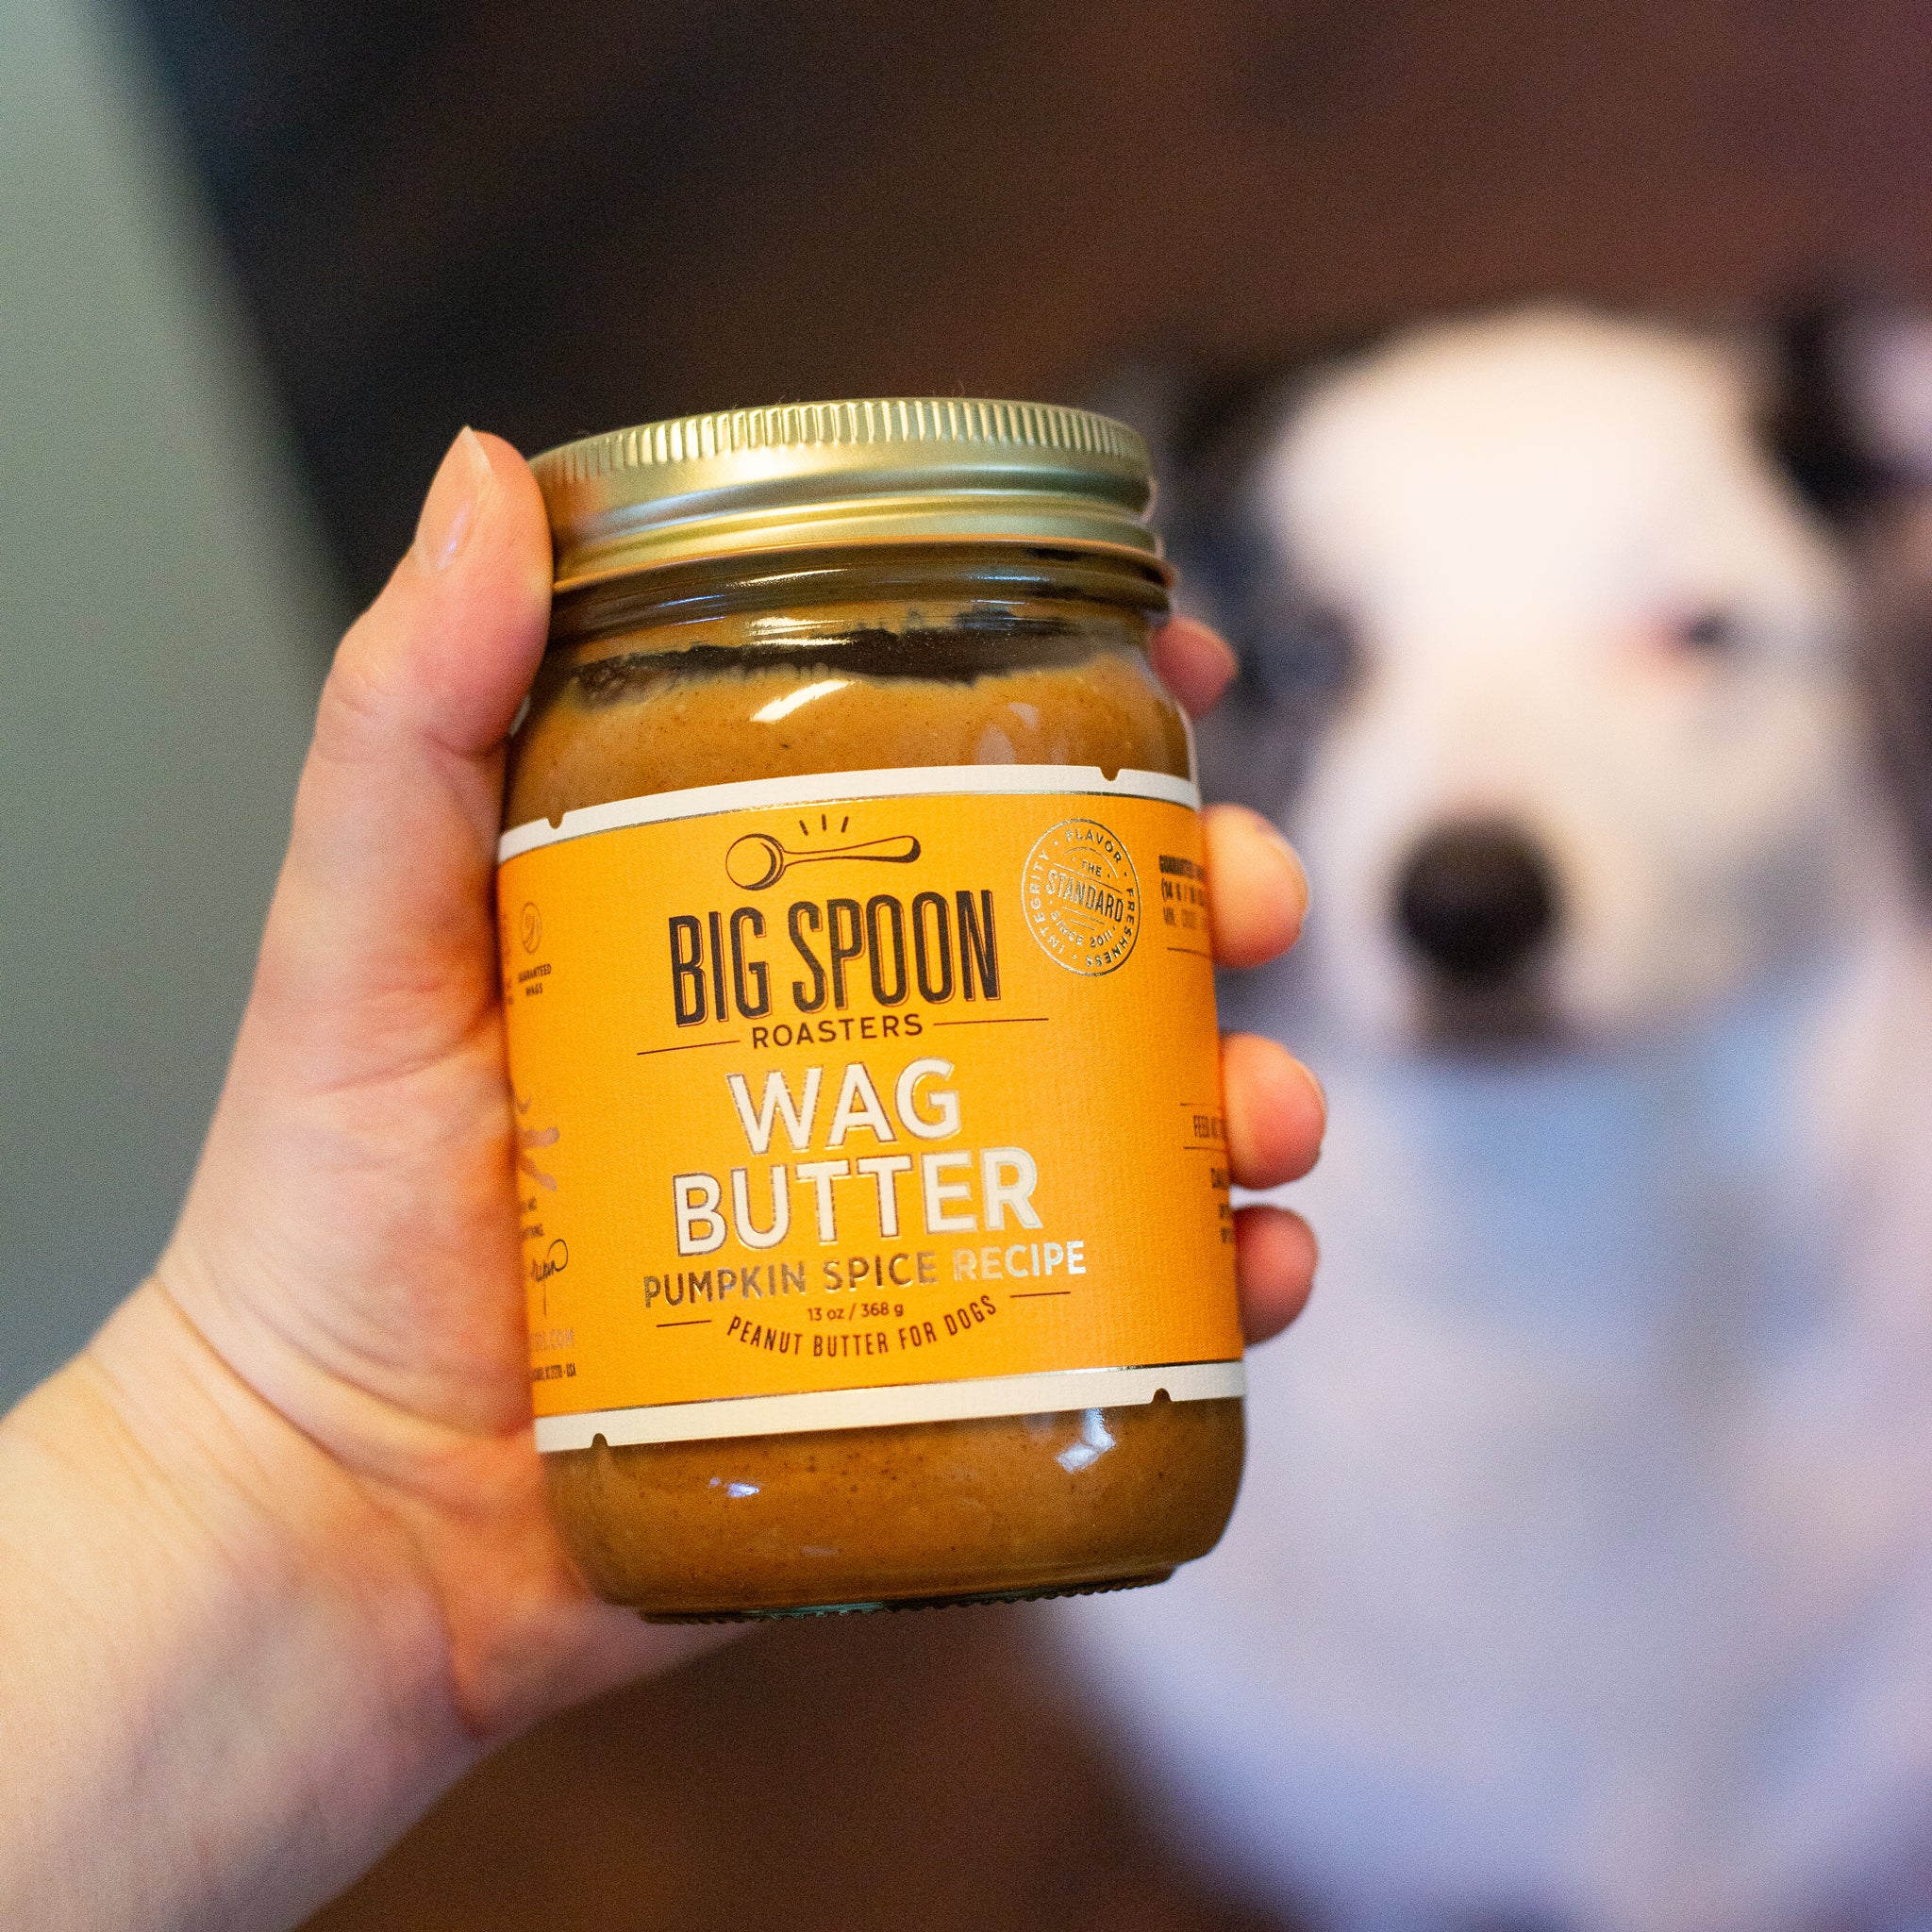 Big Spoon Nut Butters Mini Peanut Butter Variety Pack - 4 flavors